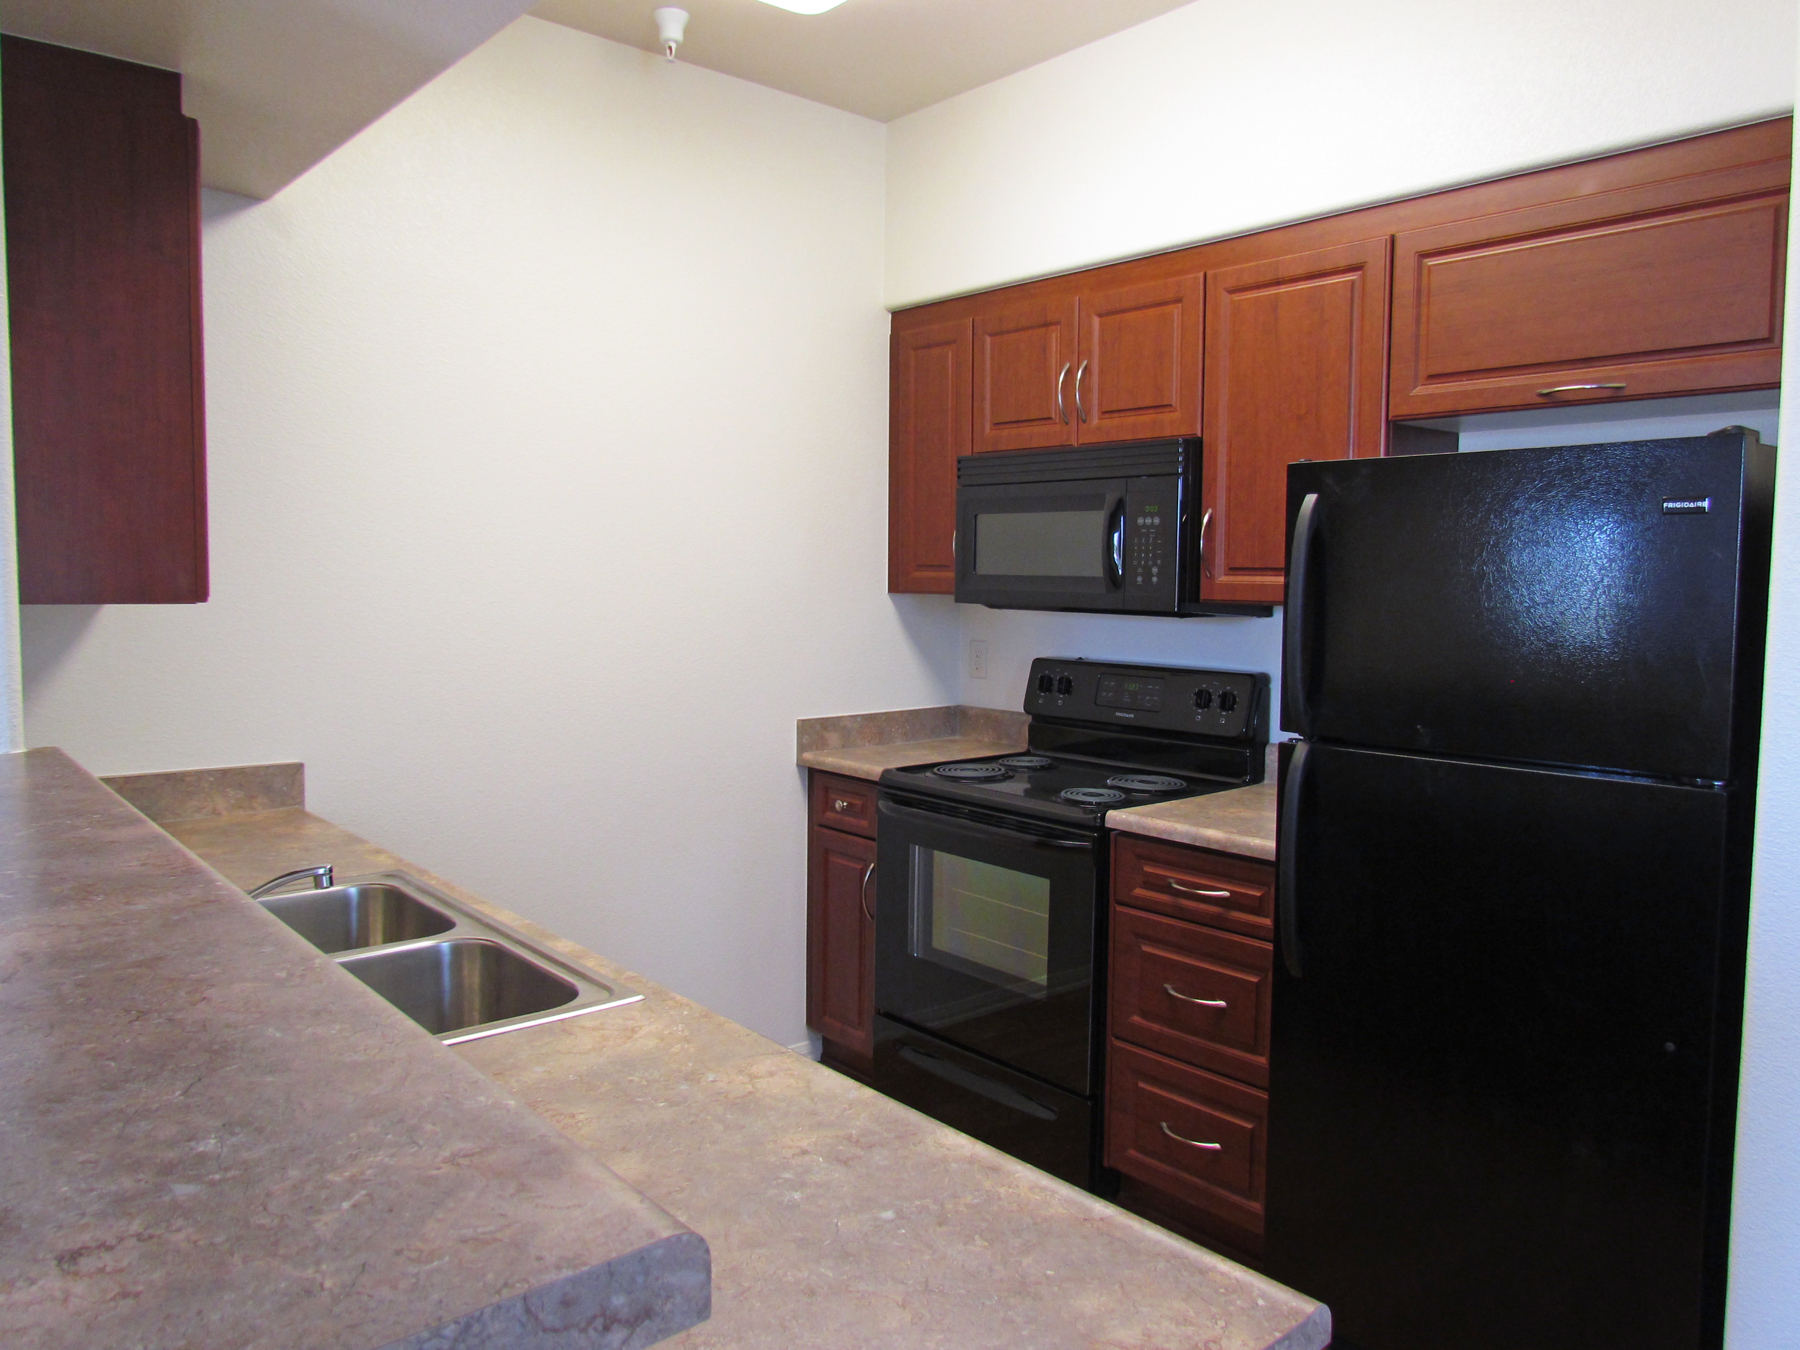 Interior view of a kitchen of a unit at Osborne Street Apartments. Refrigerator, microwave, stove, and on the opposite side is the sink and counters